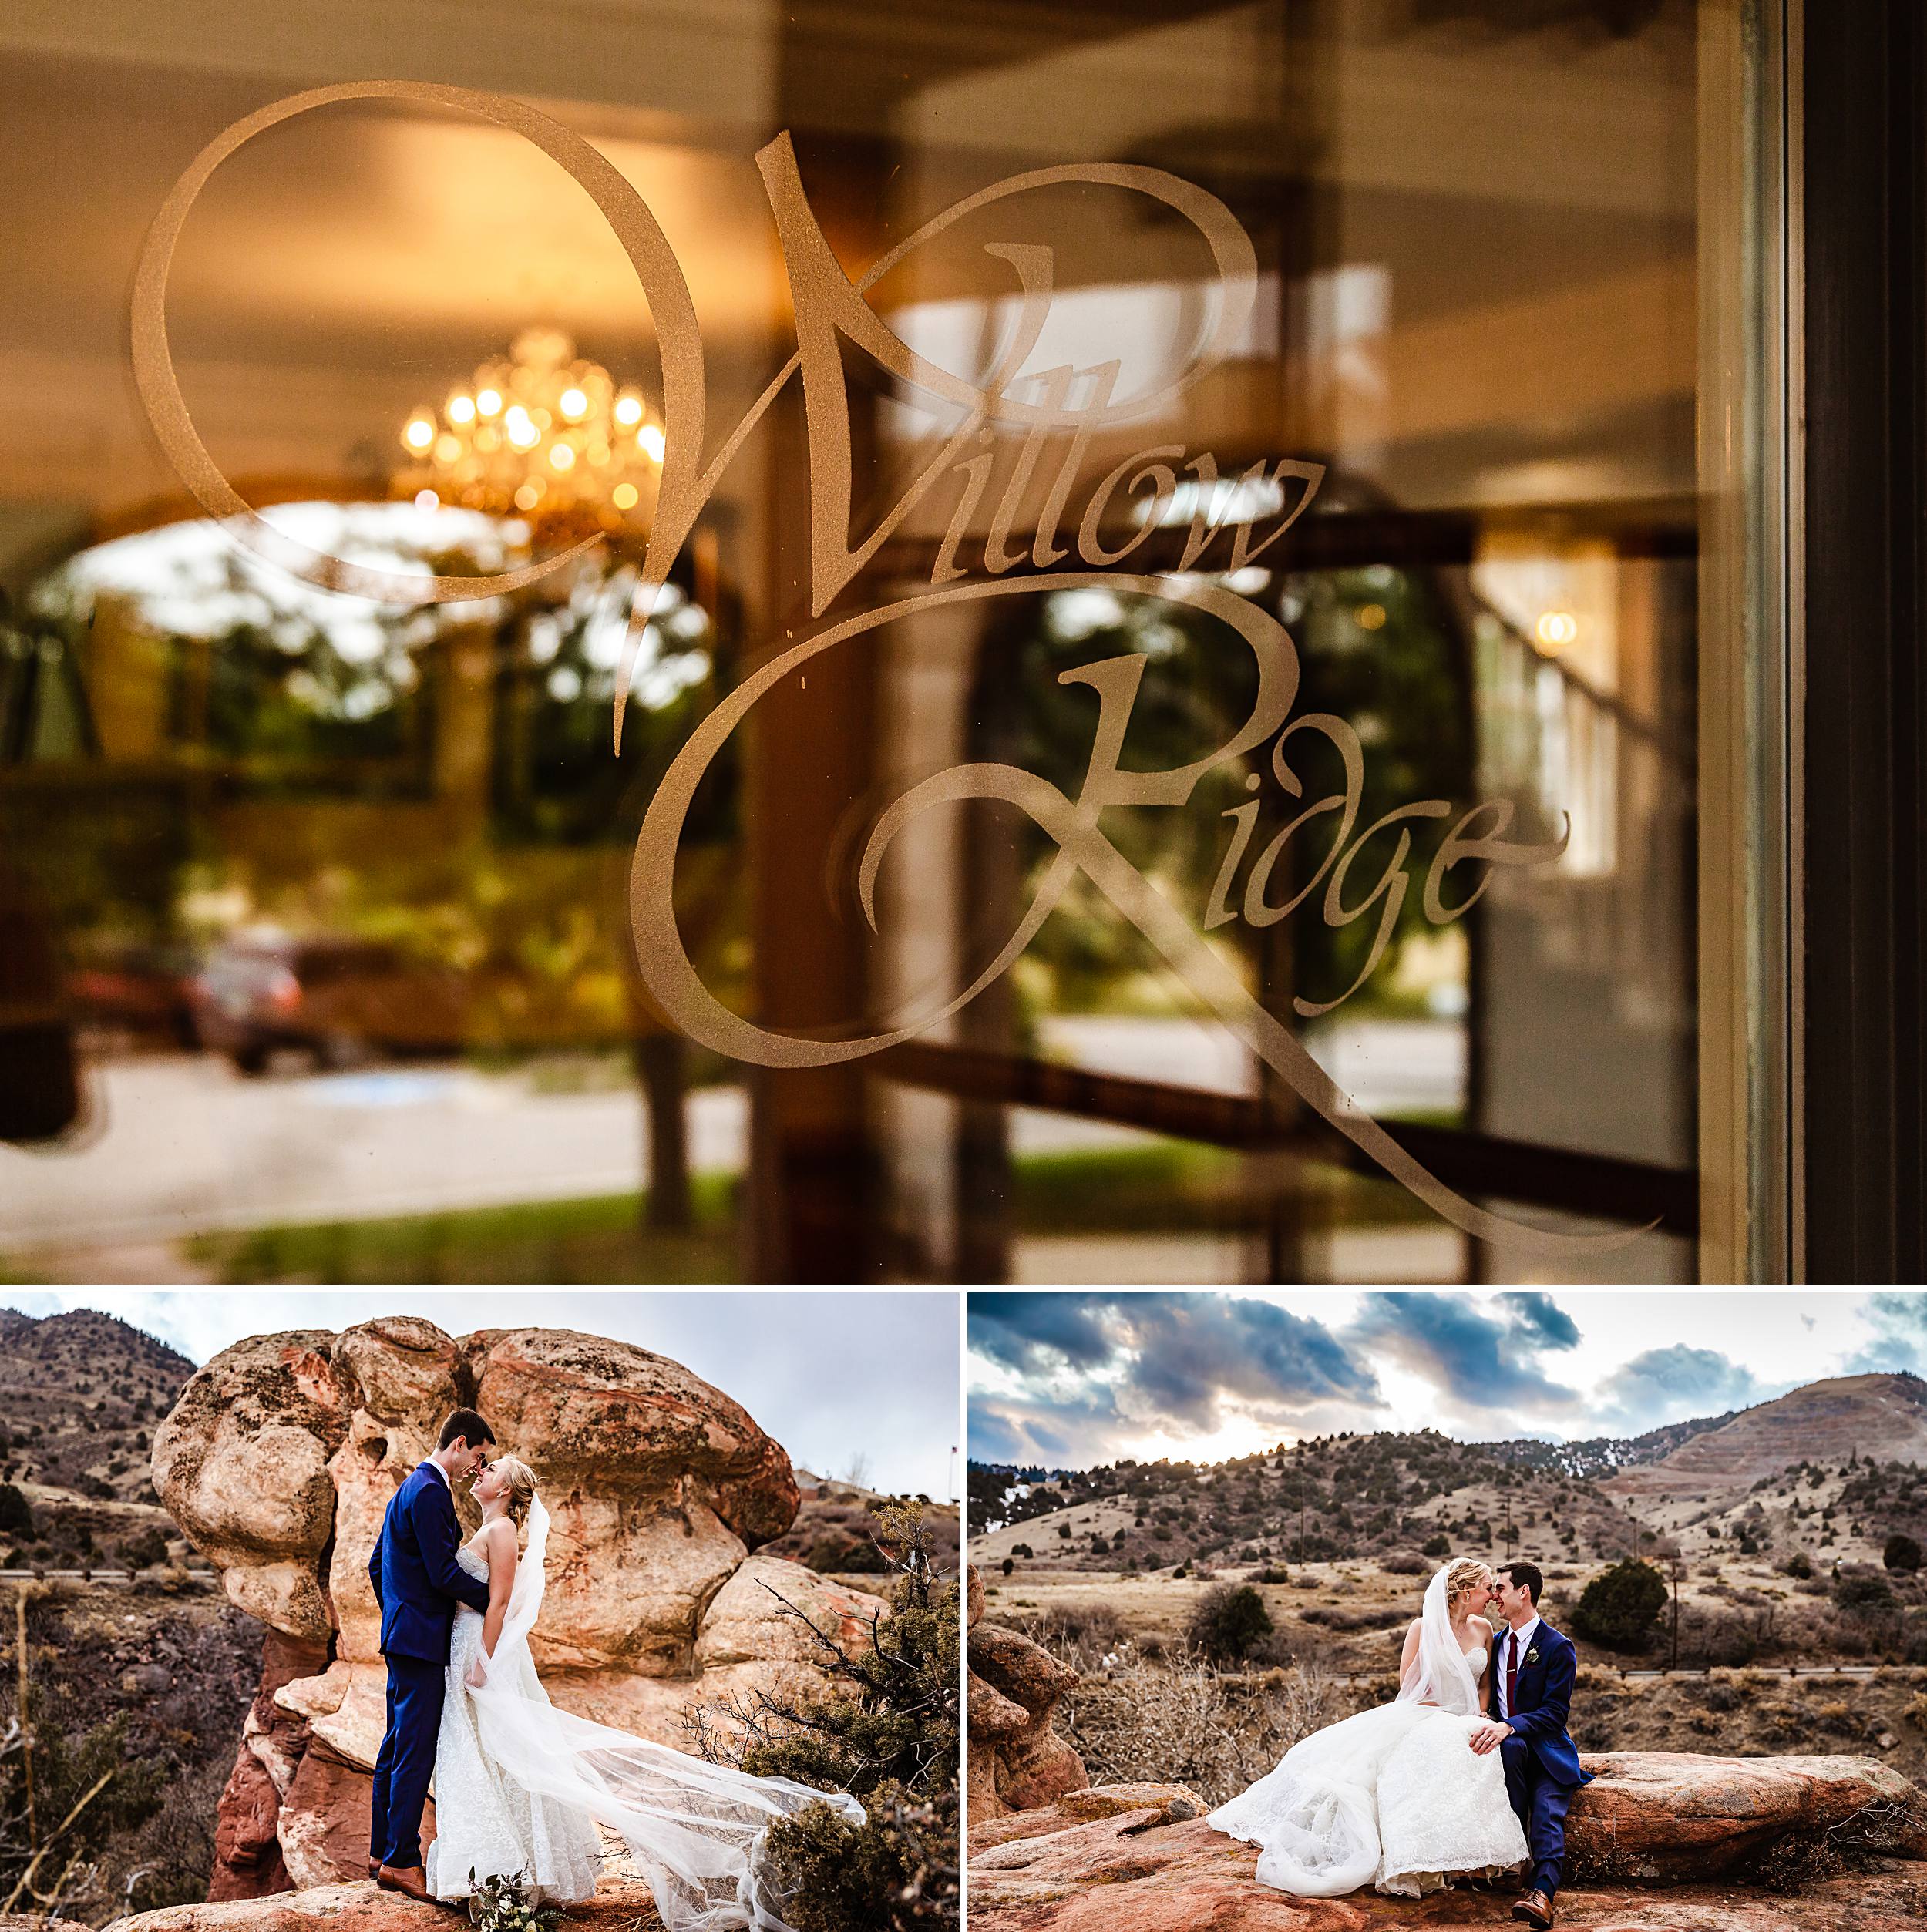 Willow Ridge Manor in Morrison, CO is an affordable wedding venue surrounded by red rocks